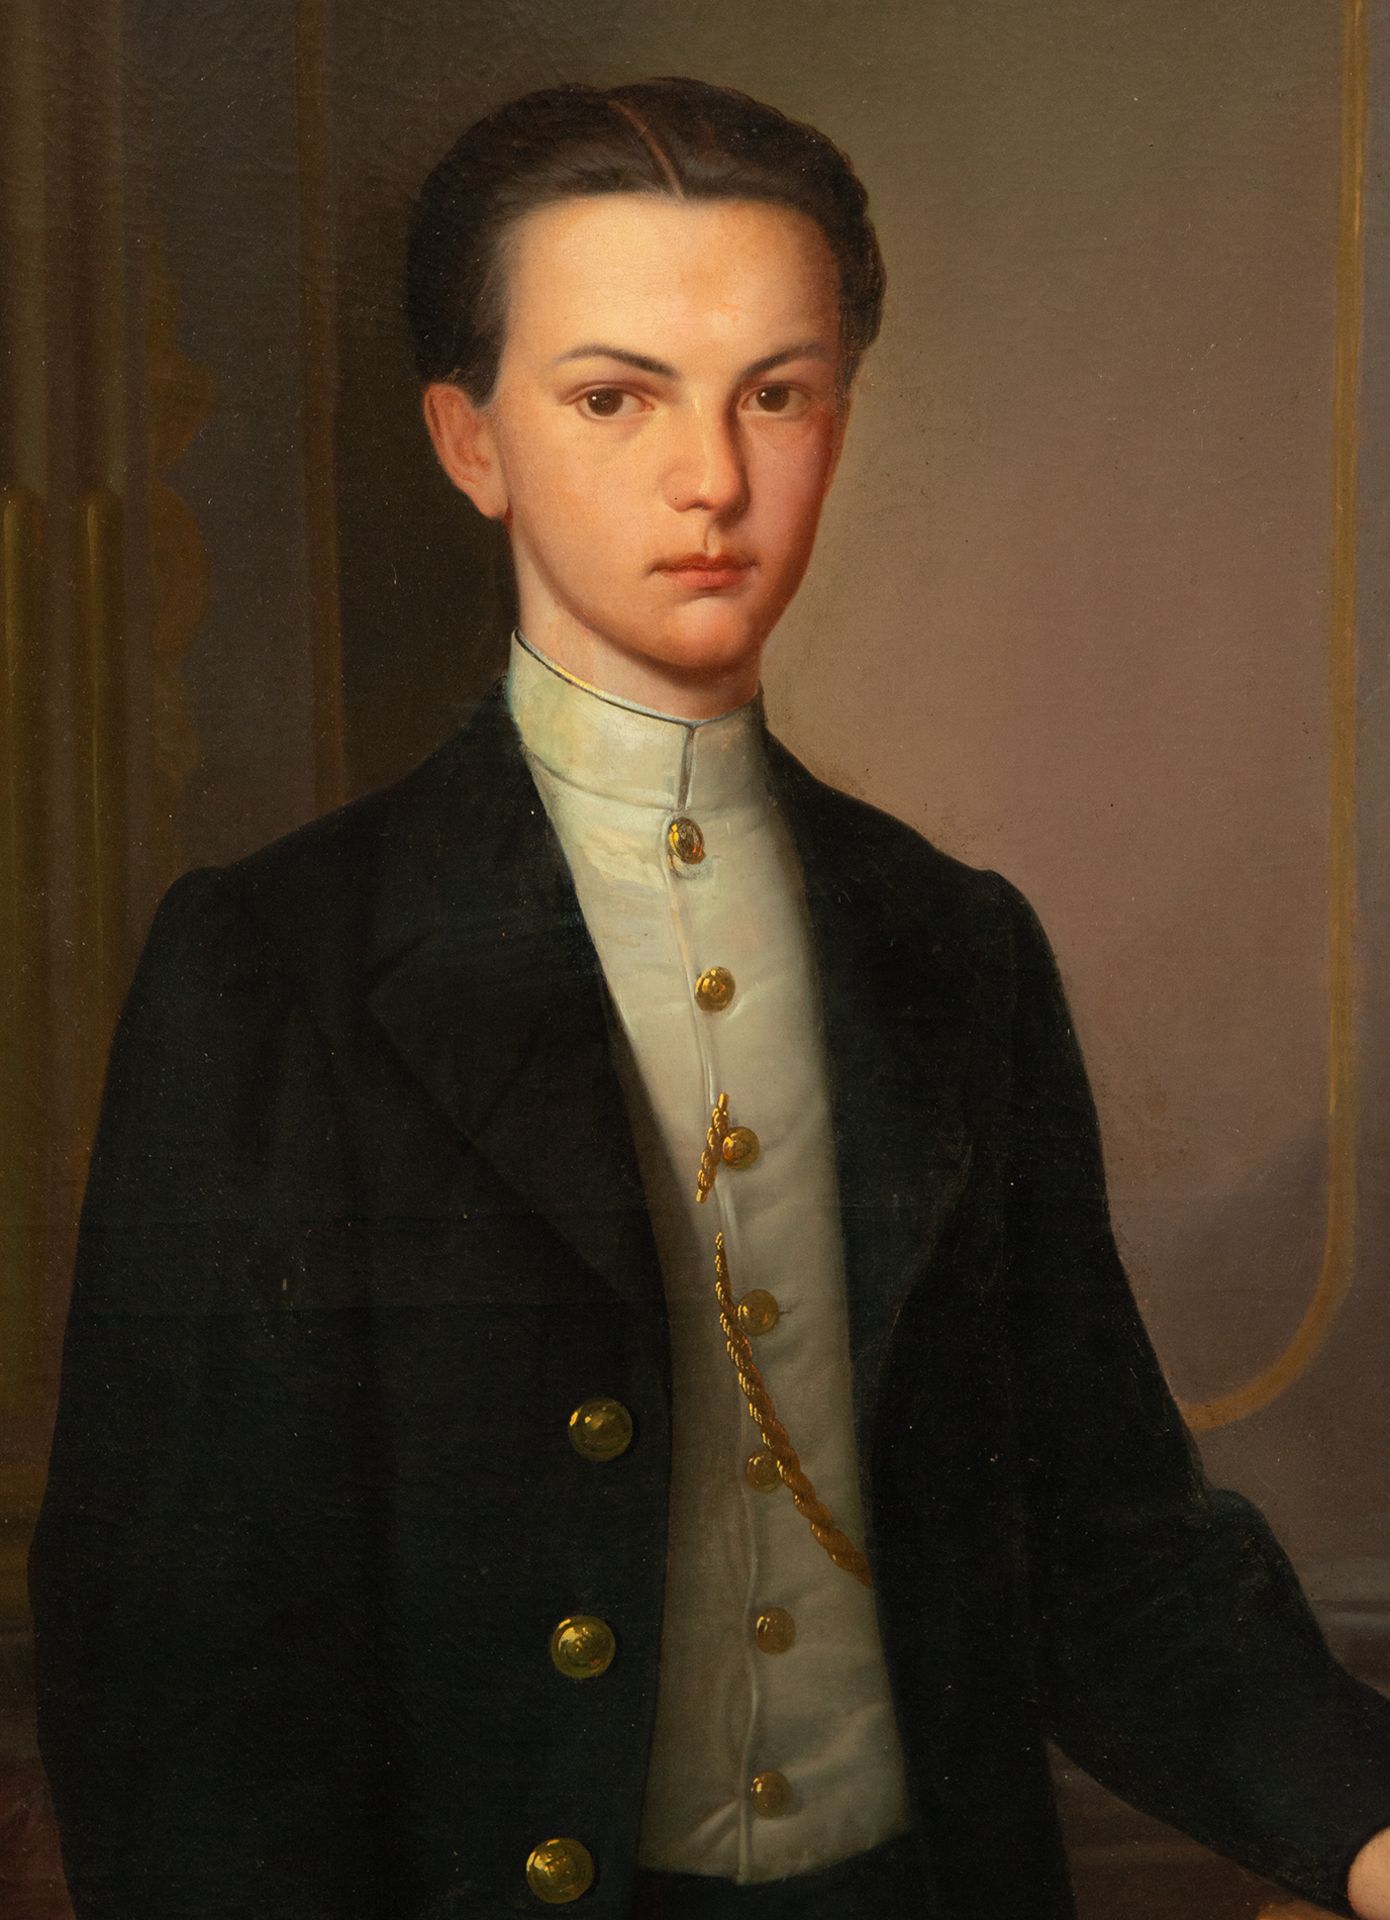 Portrait of a Young Officer, 19th century Spanish school, signed and dated Augusto Manuel de Quesada